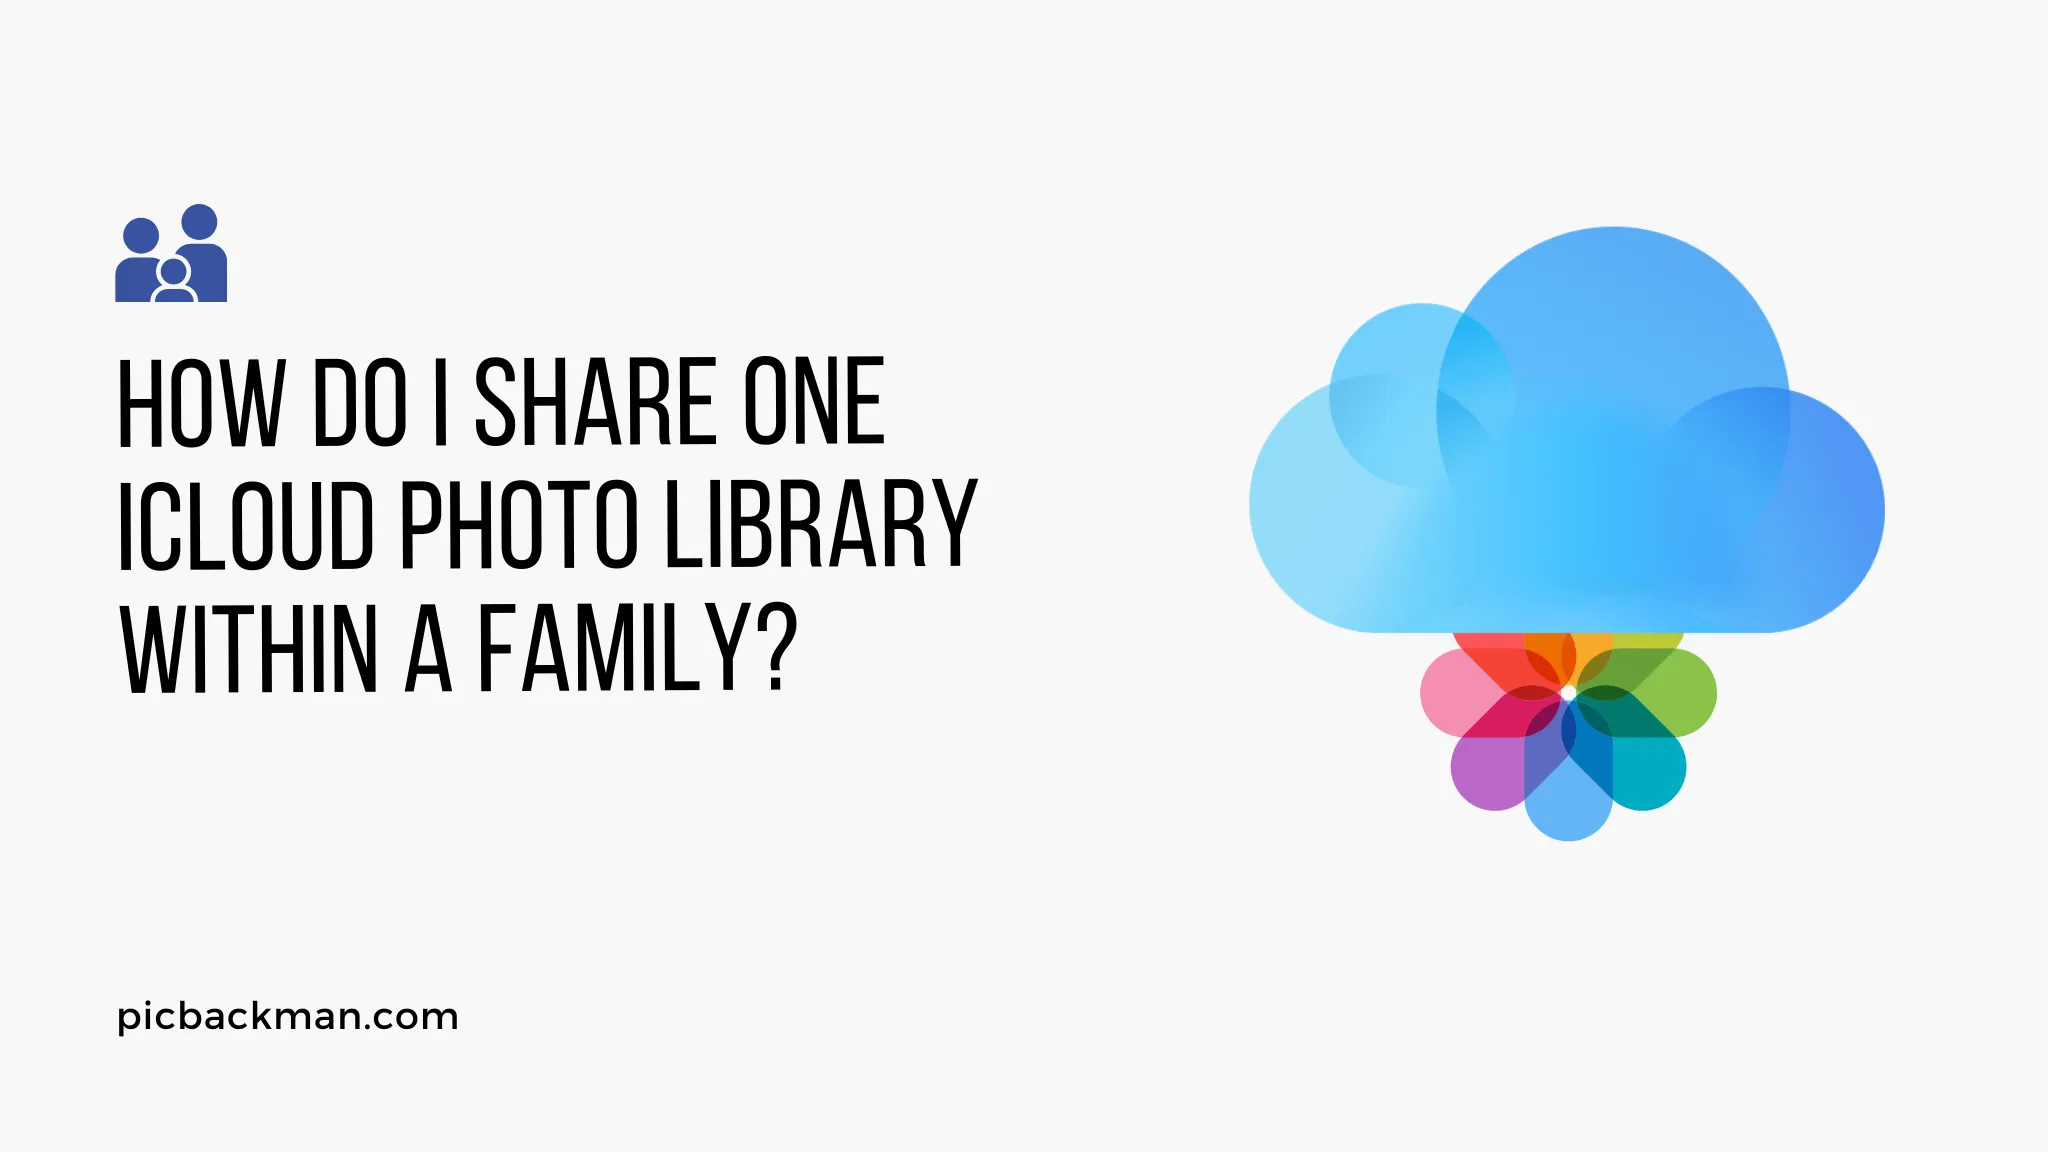 How do I Share One iCloud Photo Library within a Family?